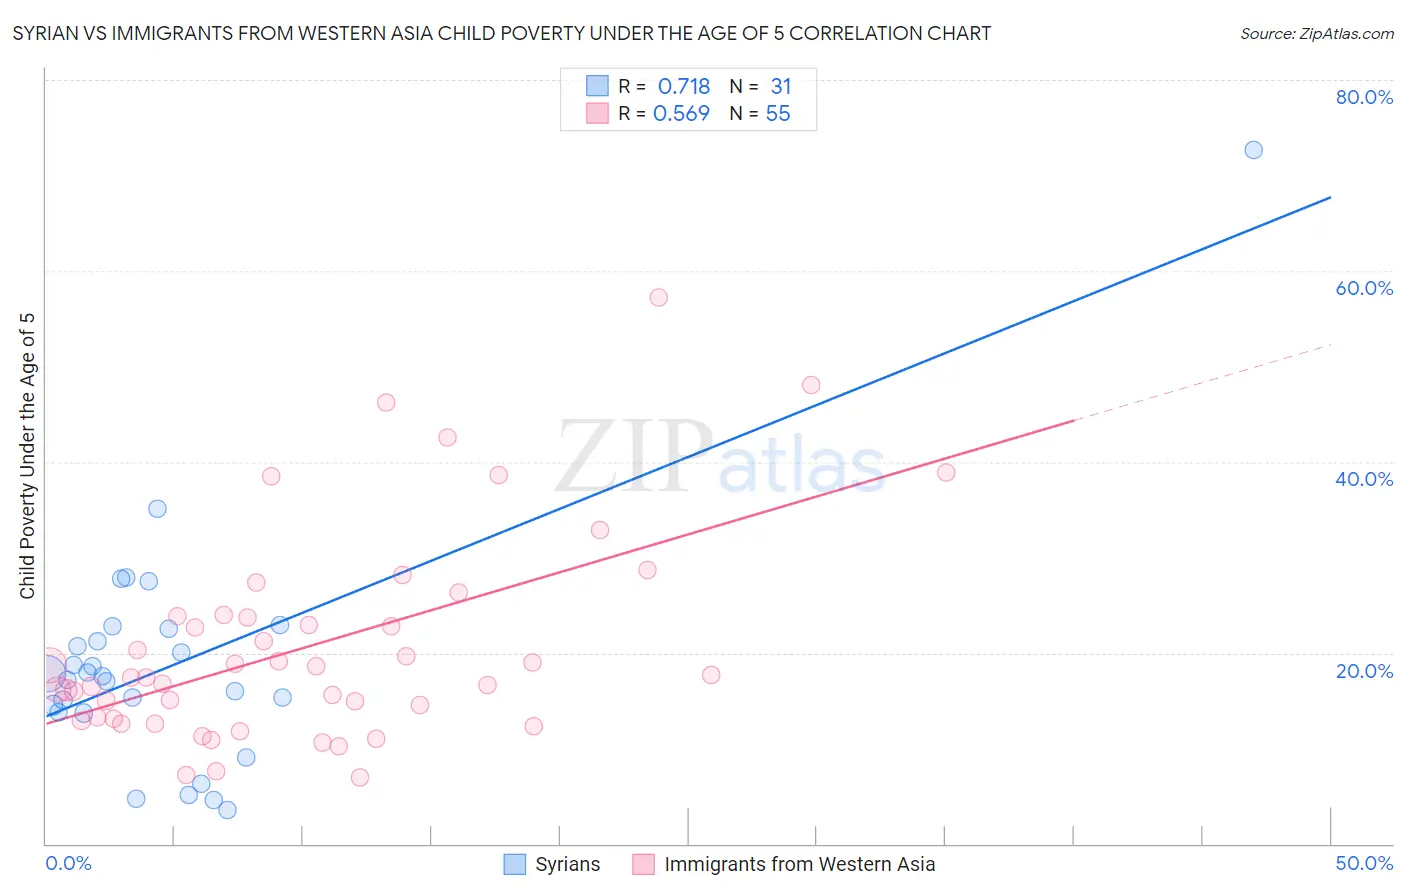 Syrian vs Immigrants from Western Asia Child Poverty Under the Age of 5